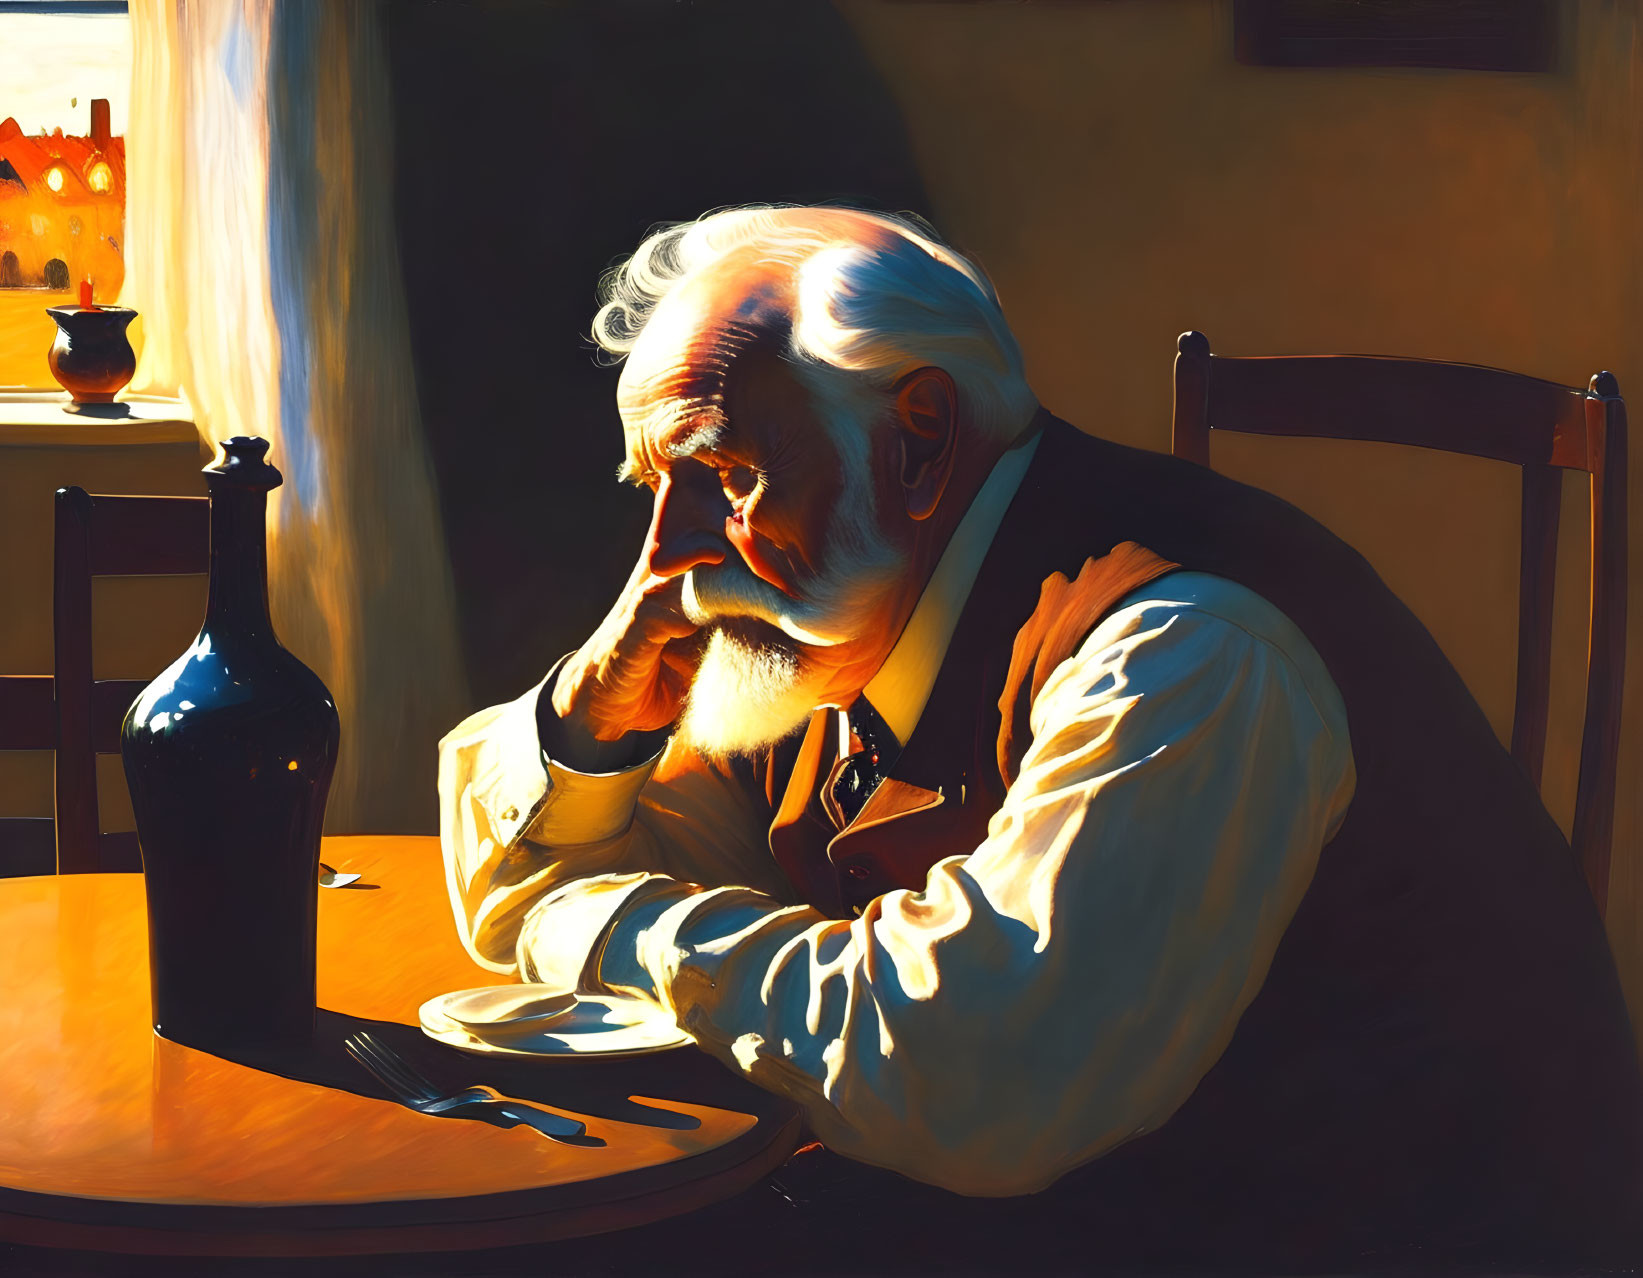 Elderly man with white beard sitting pensively at table in warmly lit room